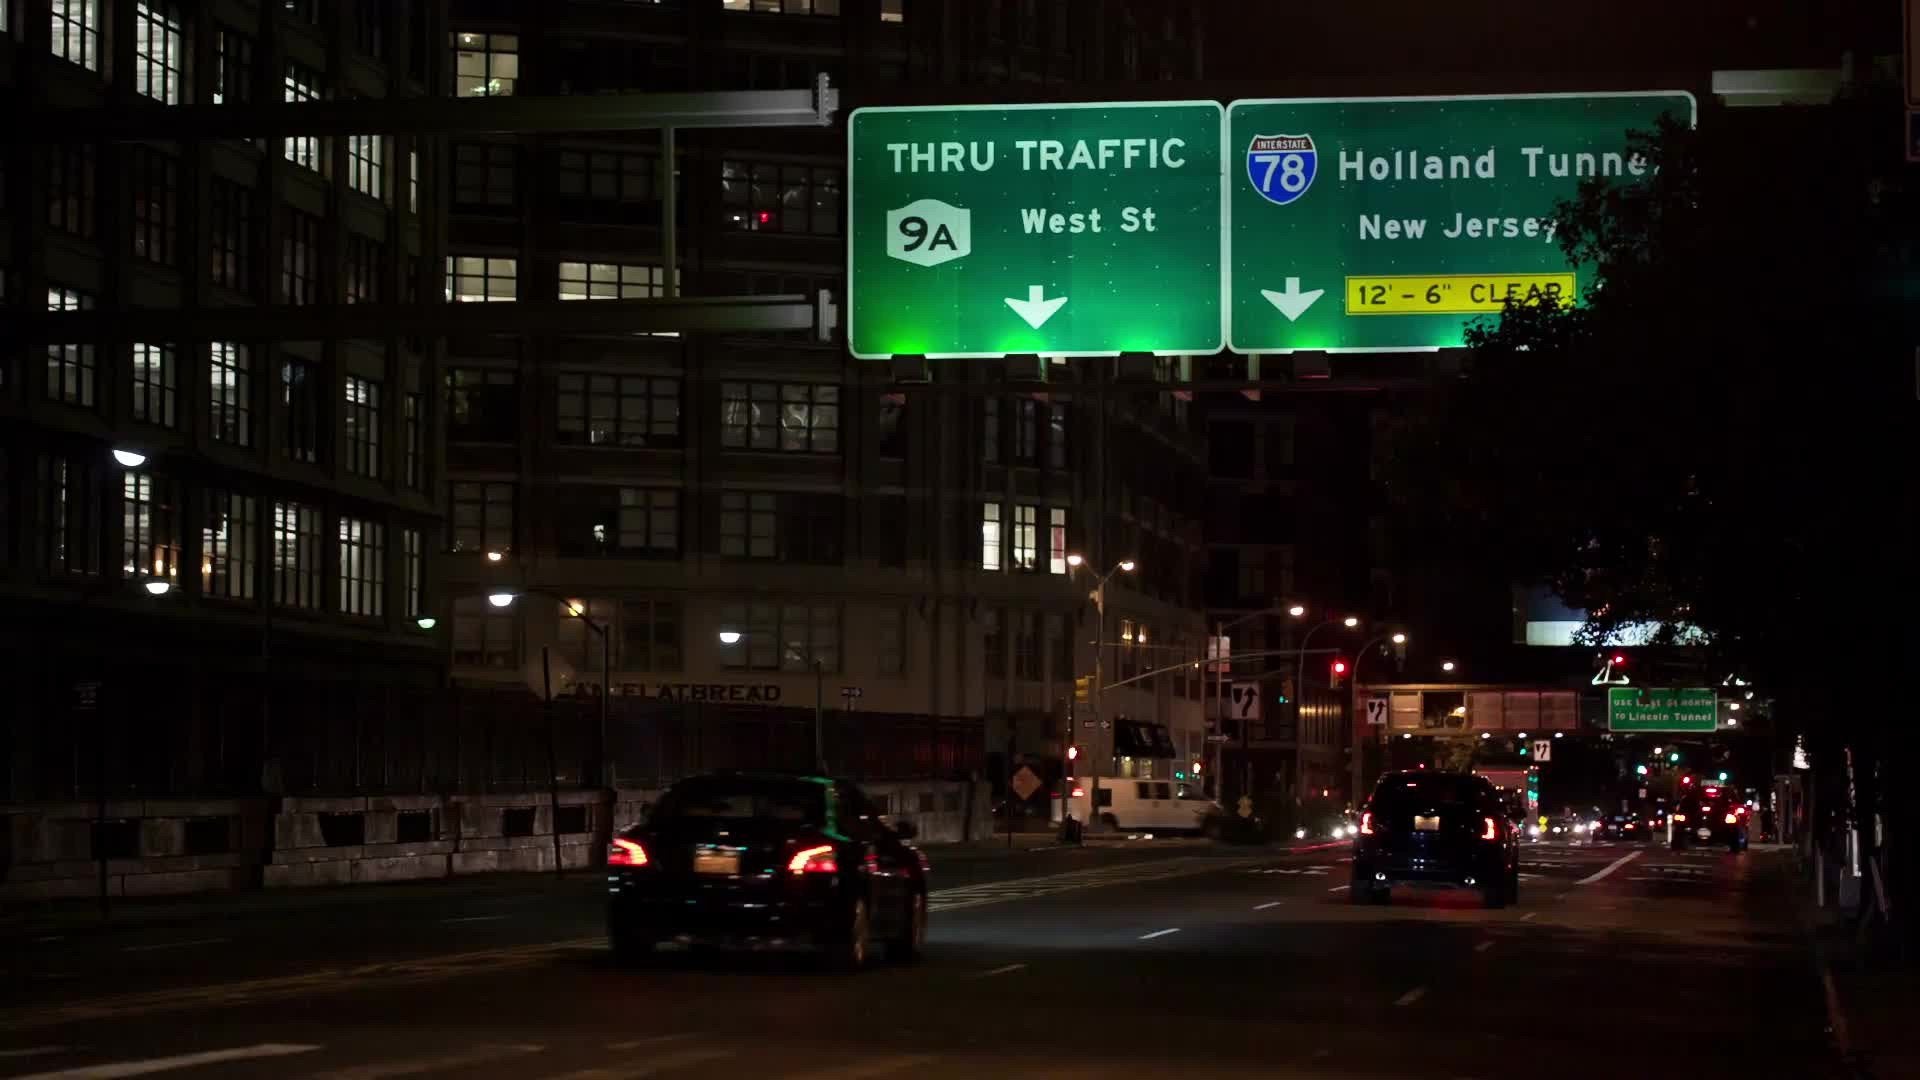 sign for Holland Tunnel on Varick Street in Lower Manhattan at night in NYC